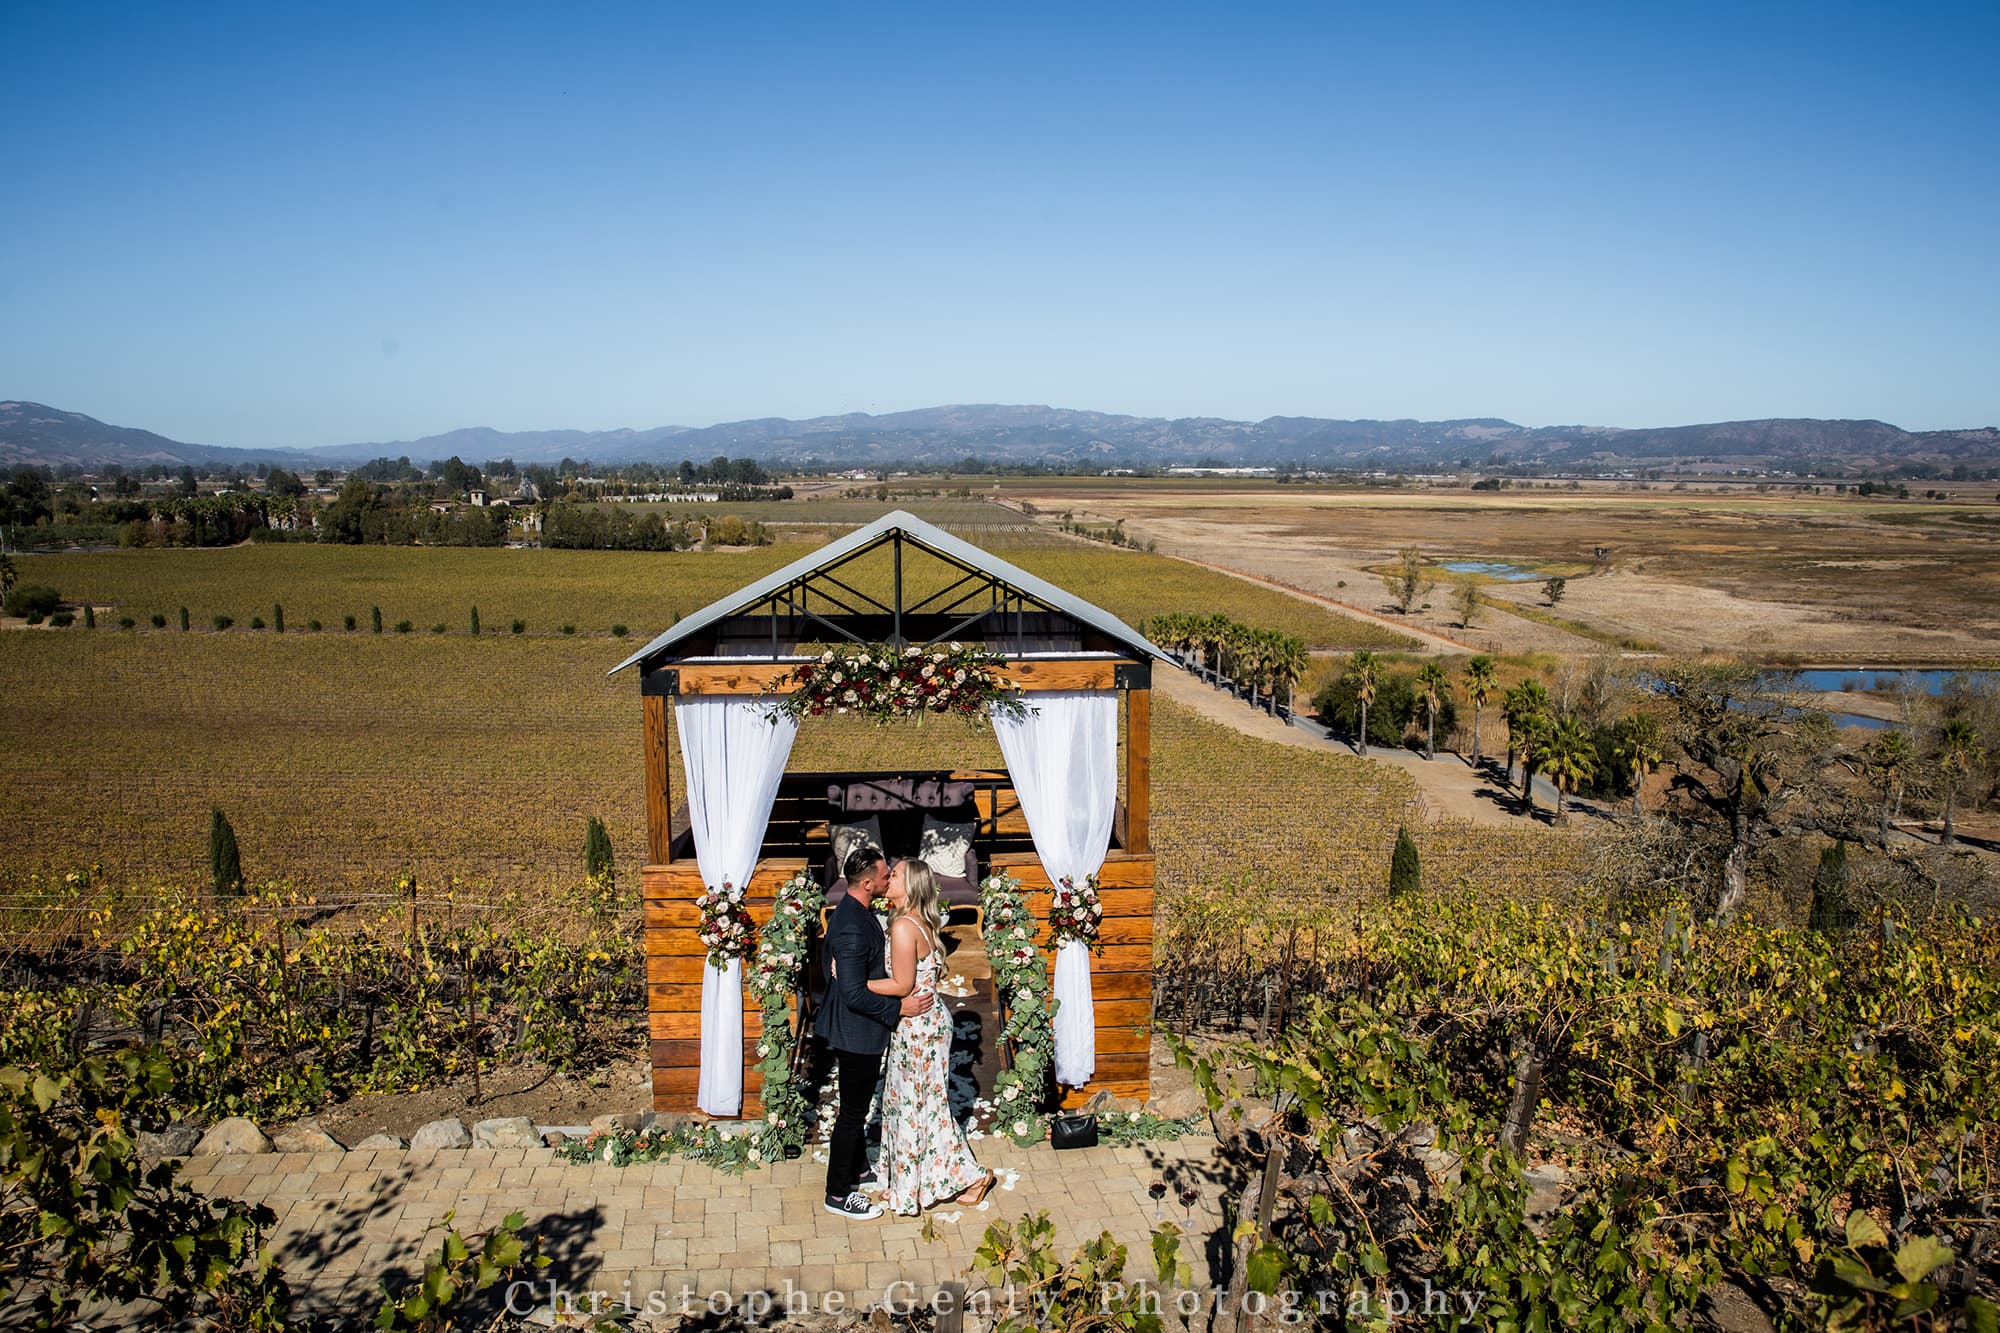 Best Proposal Wineries in The Sonoma Valley - Viansa Winery